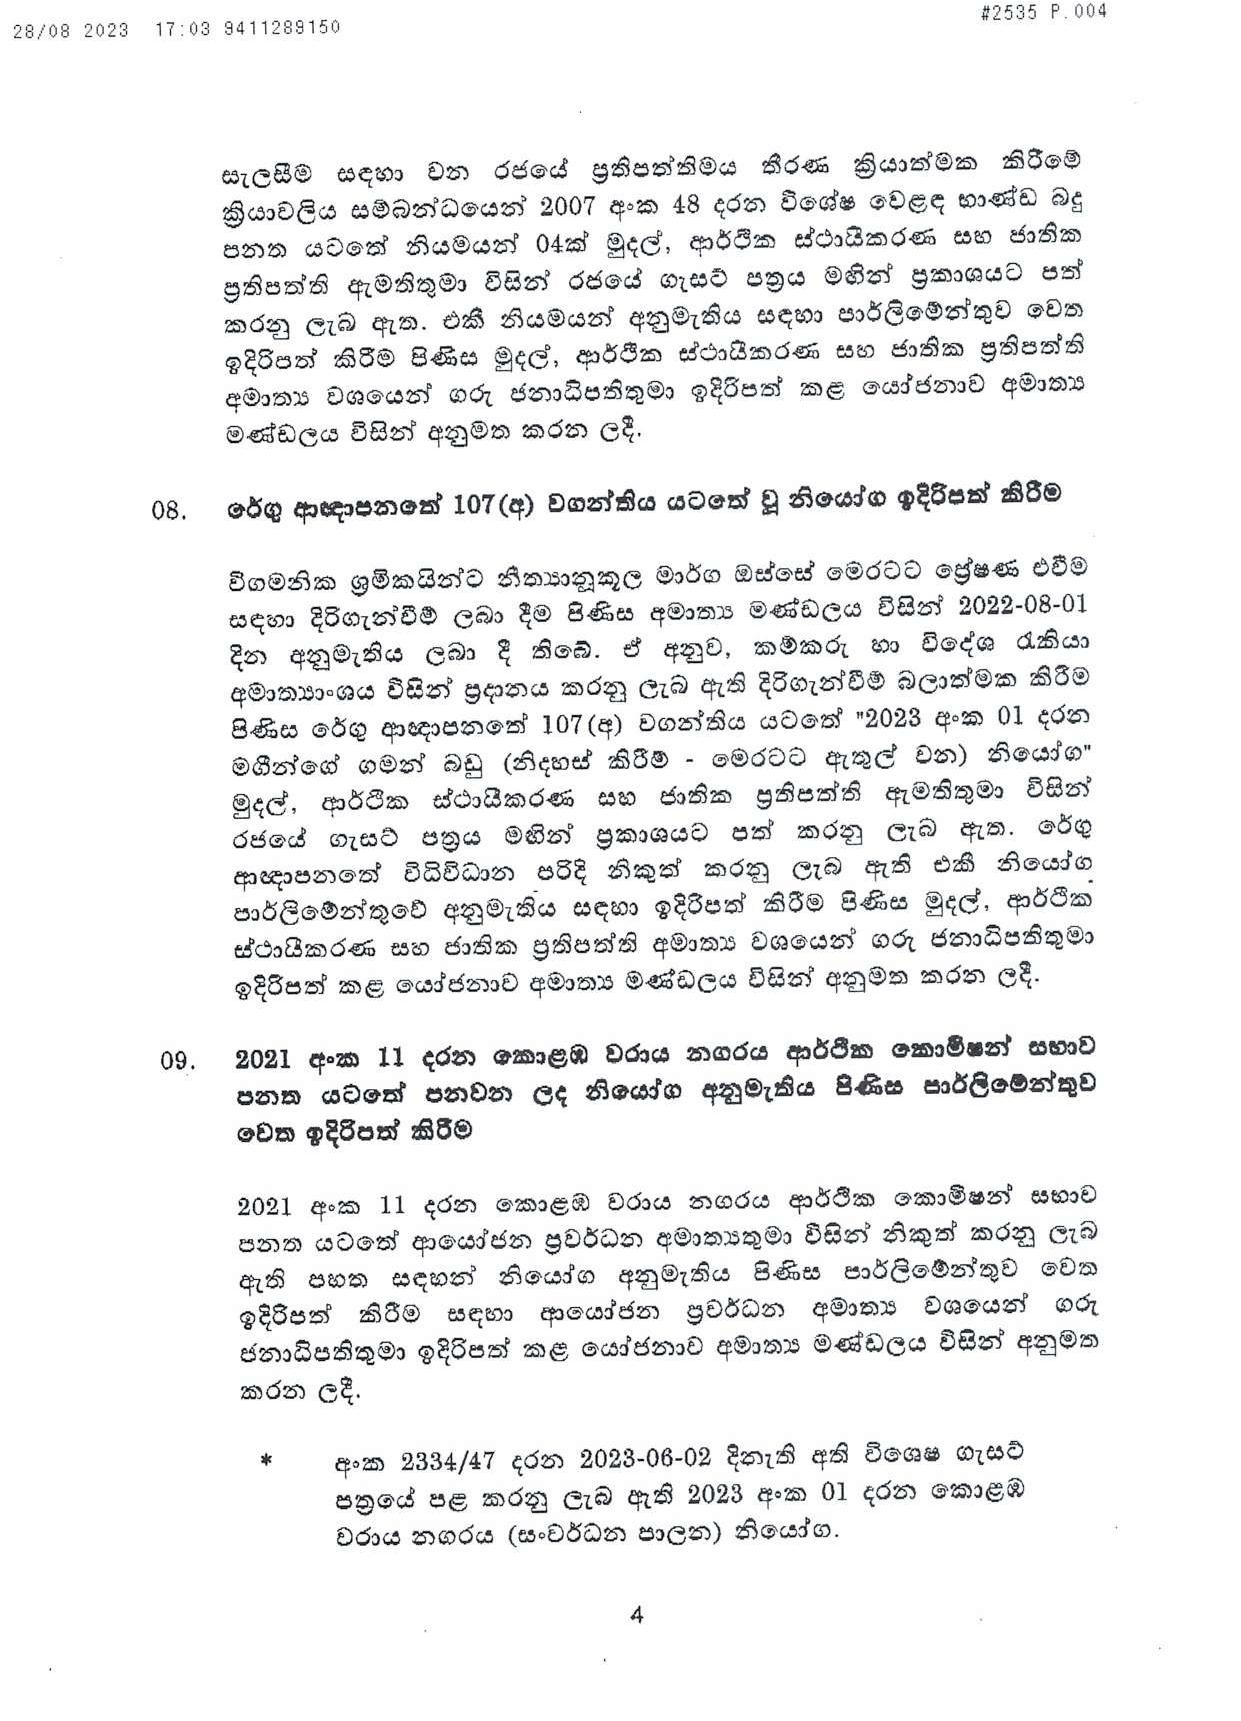 Cabinet Decision on 28.08.2023 page 004